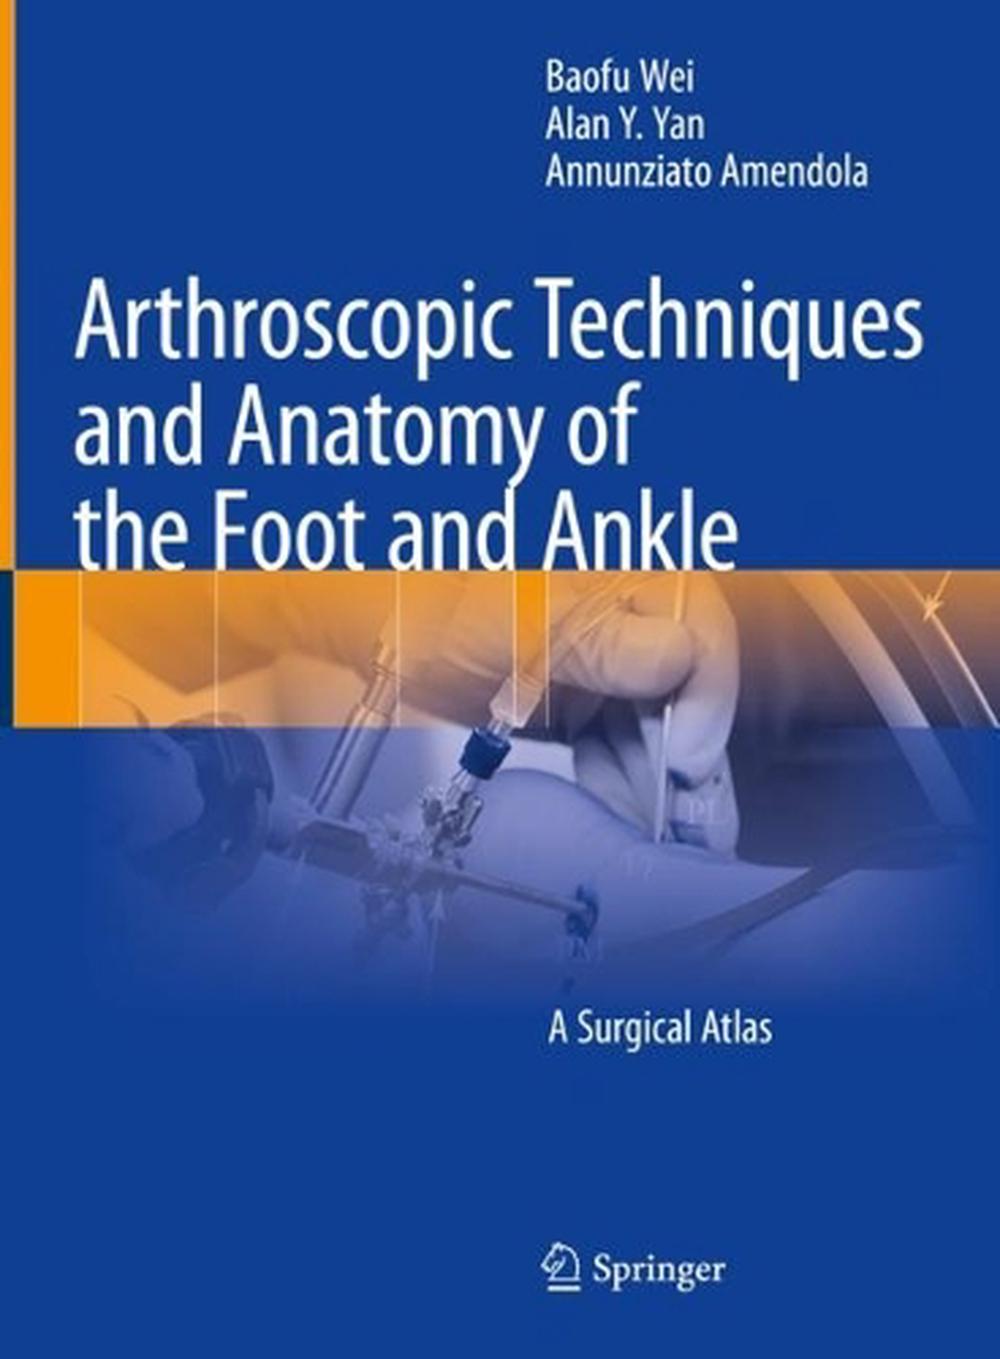 Arthroscopic Techniques and Anatomy of the Foot and Ankle by Baofu Wei ...